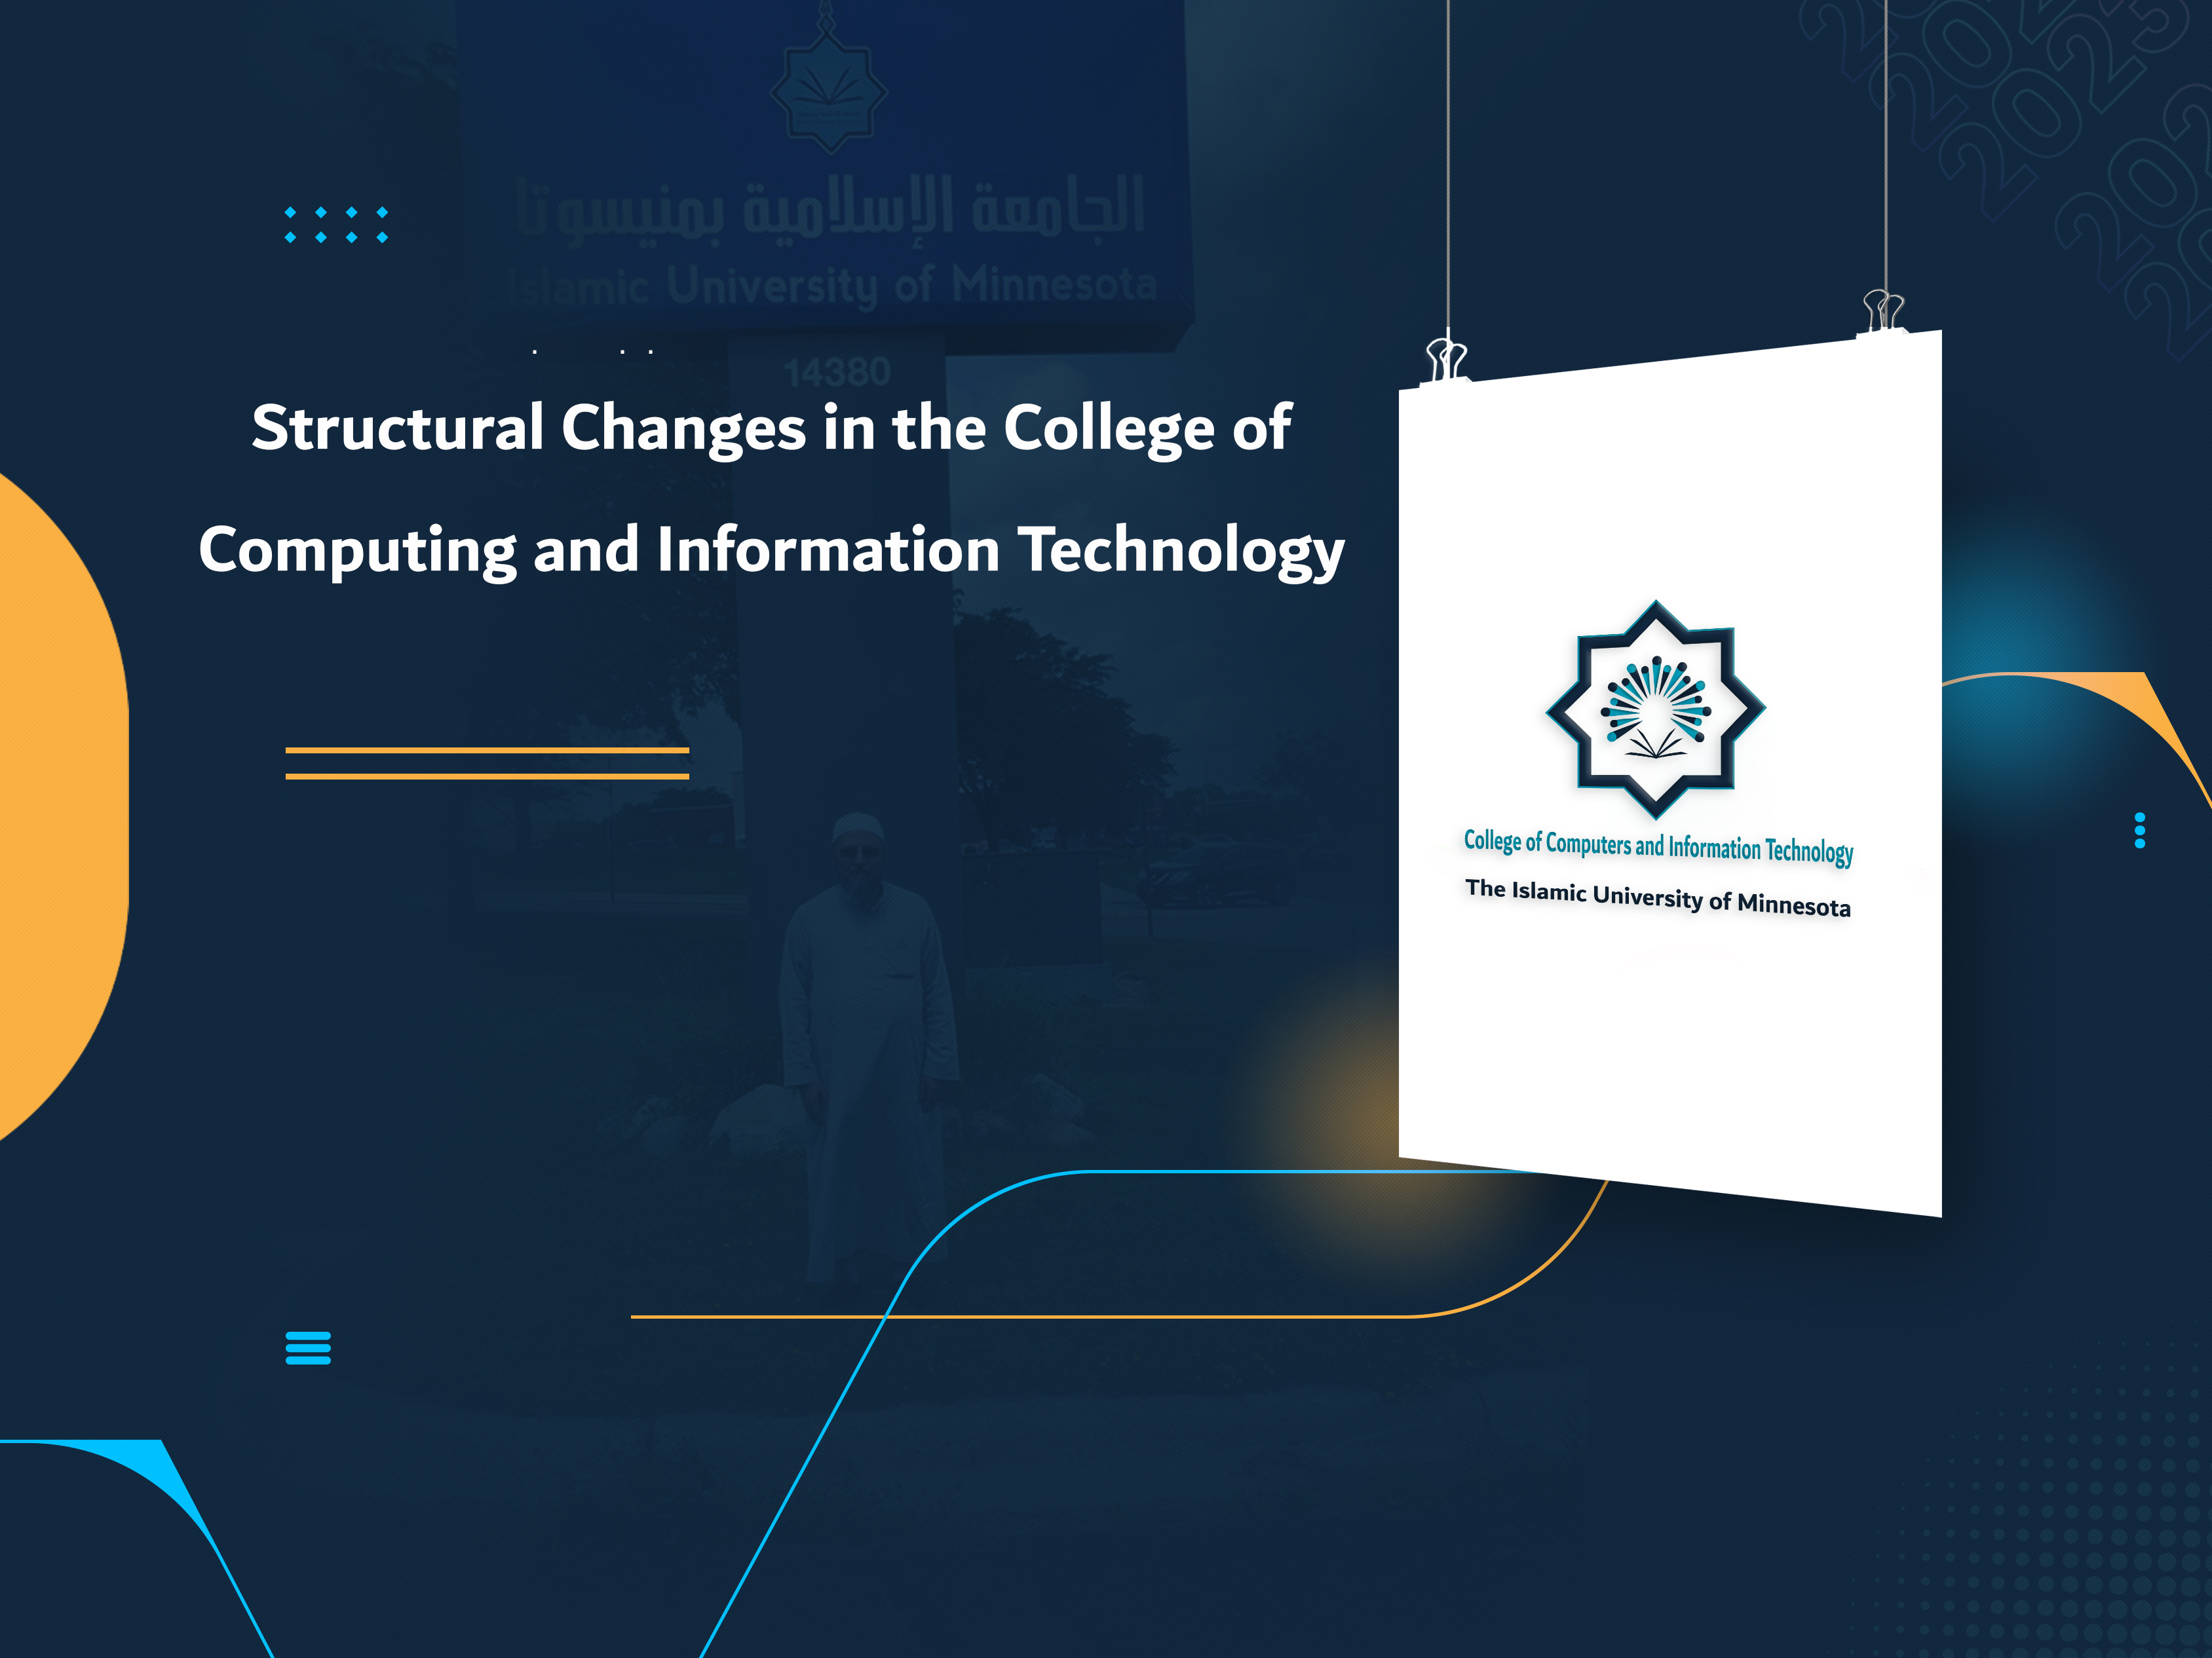 Structural Changes in the College of Computing and Information Technology